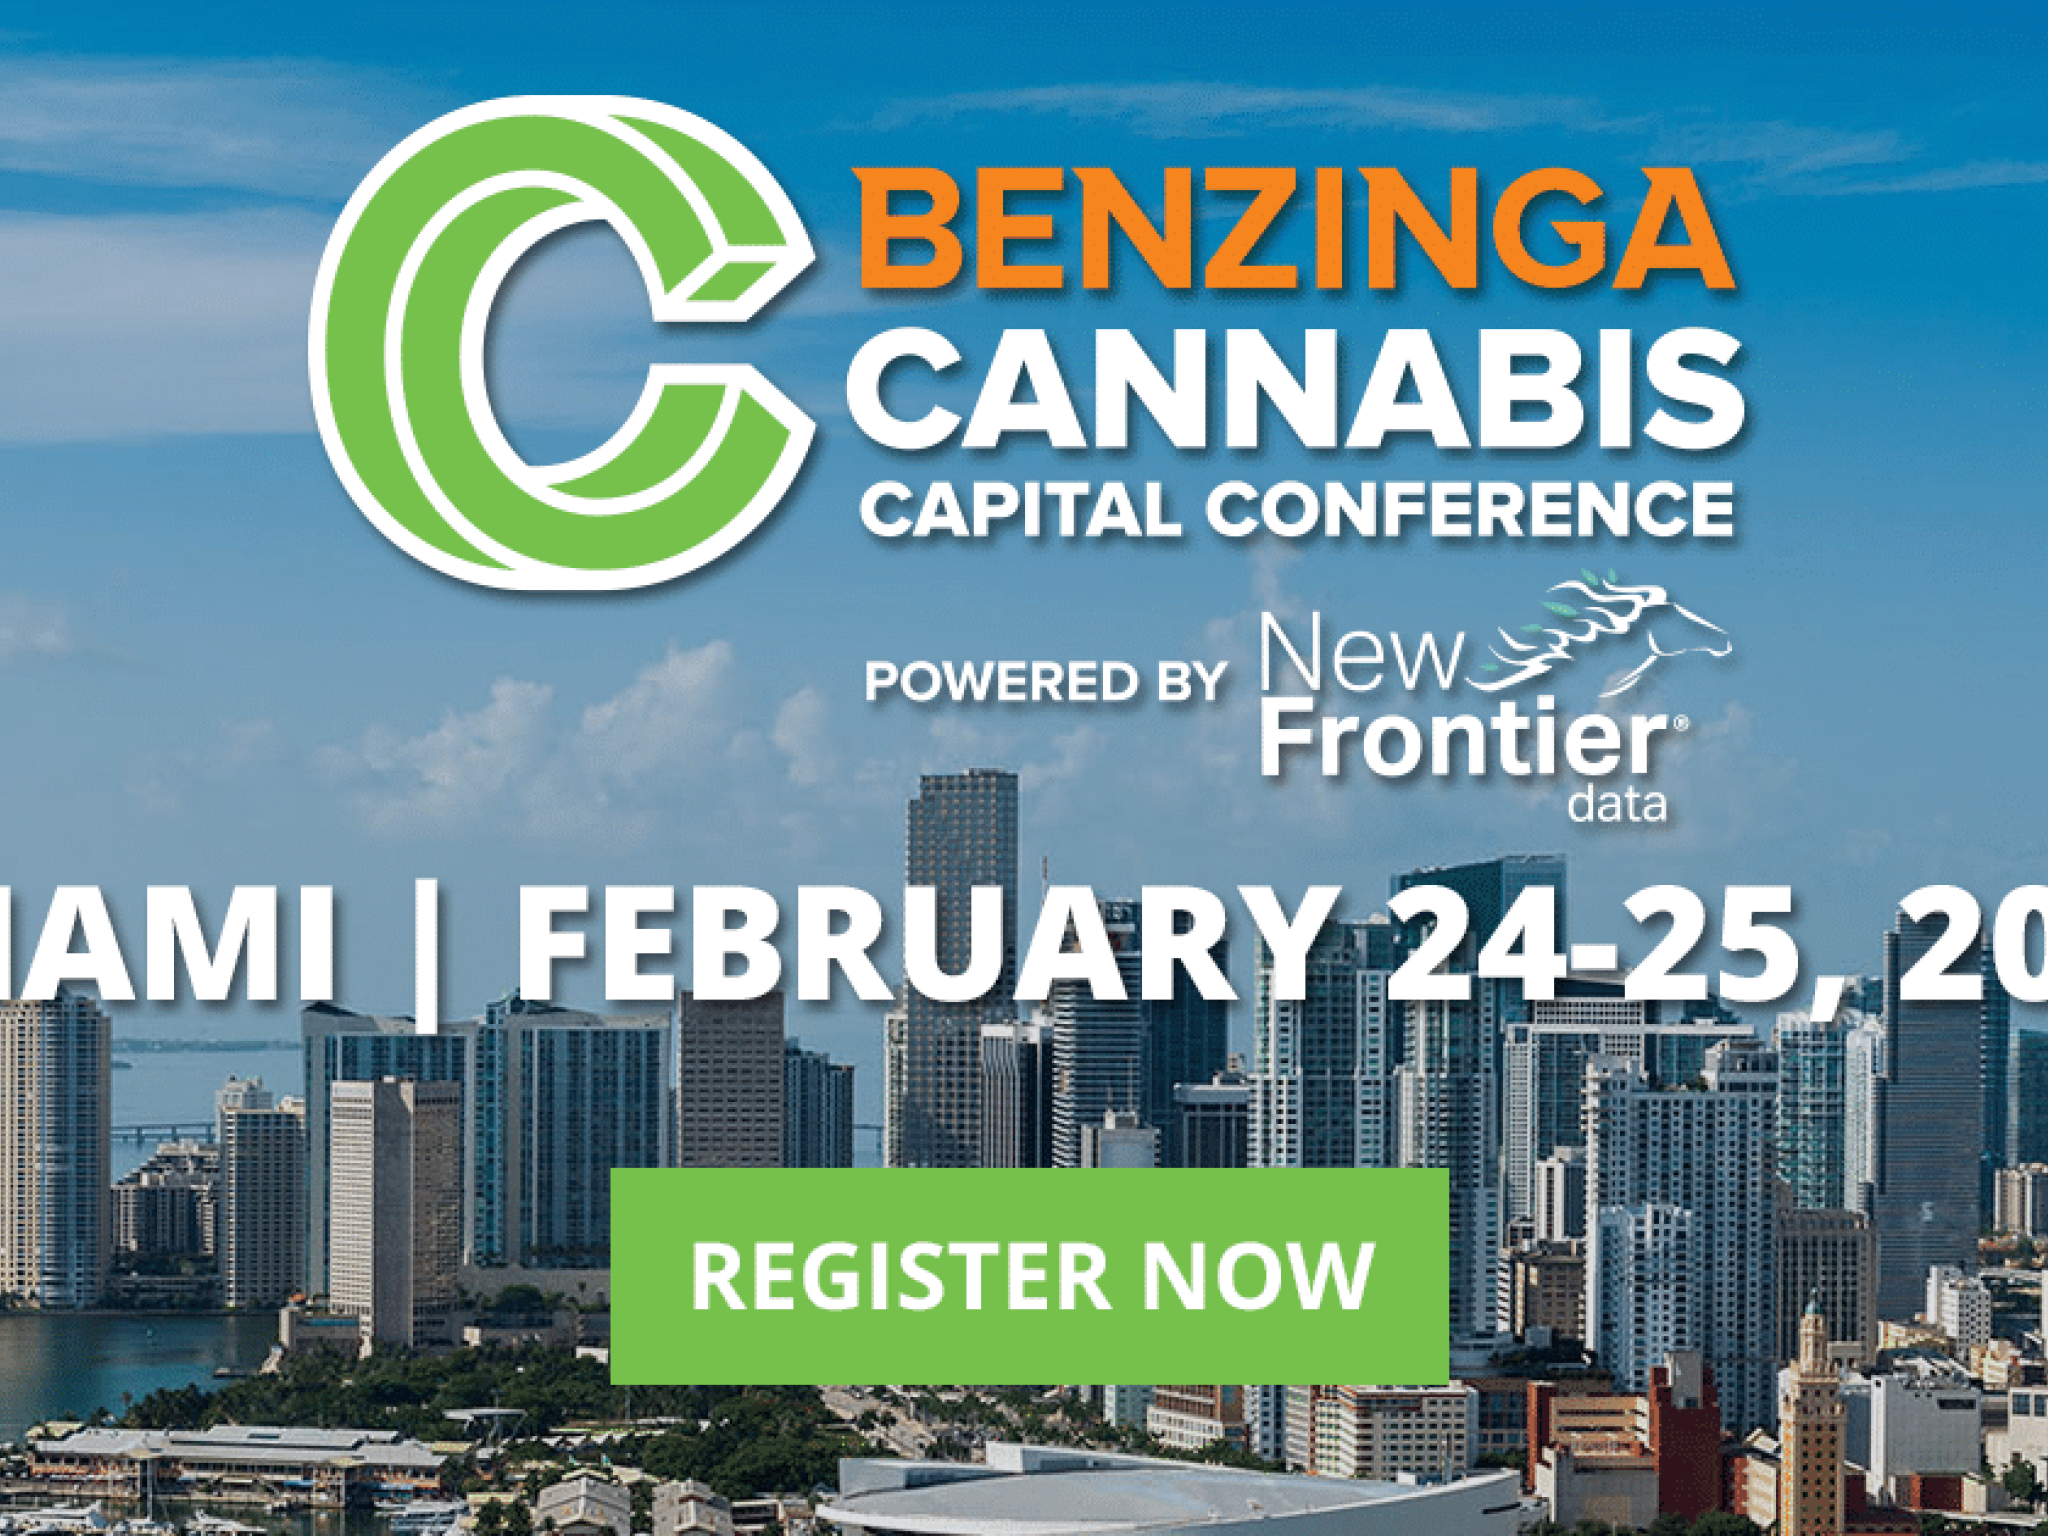  30-top-cannabis-executives-insiders-and-experts-set-to-appear-at-the-2020-benzinga-cannabis-capital-conference-in-miami 